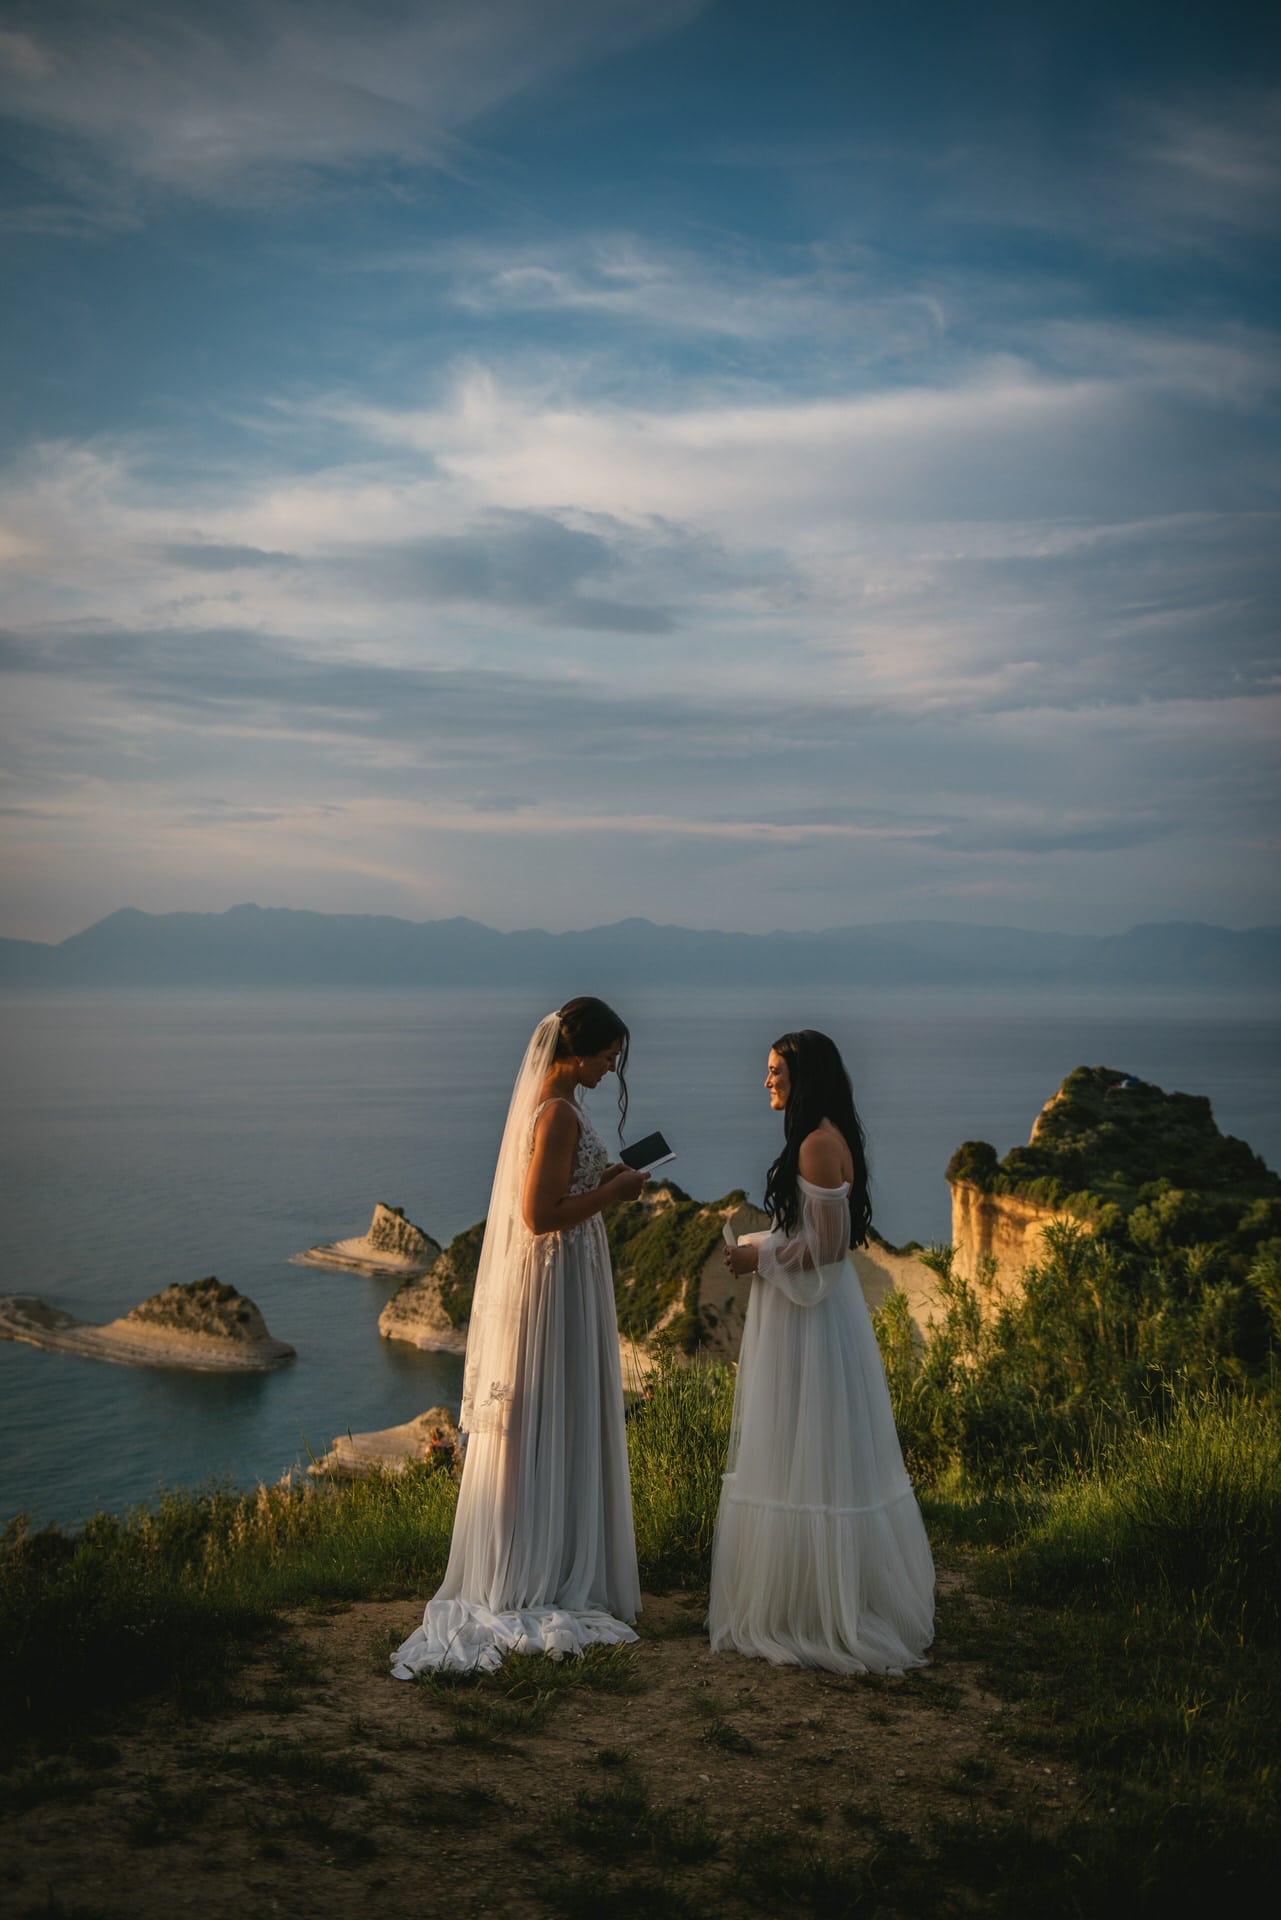 A heartfelt moment during the Corfu elopement ceremony.